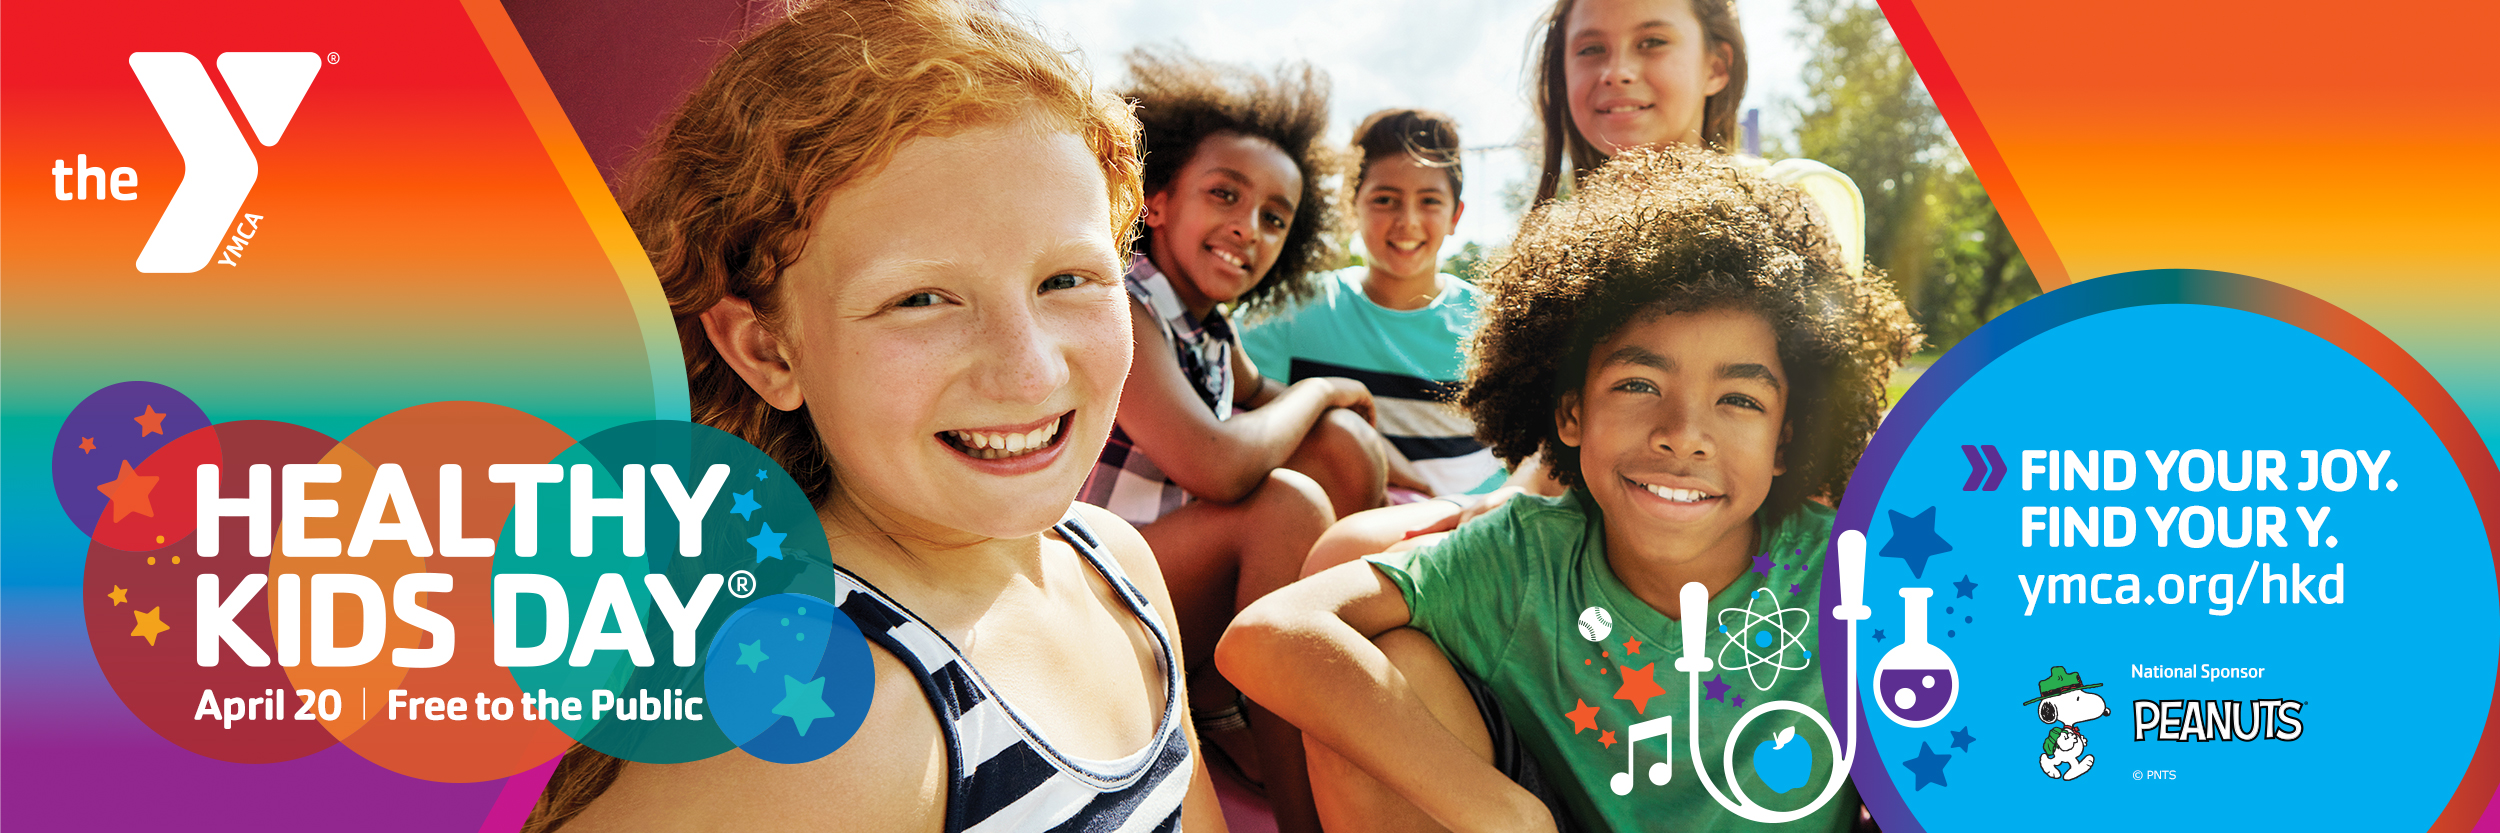 Gloucester County YMCA Healthy Kids Day @ Gloucester County YMCA | Woodbury | New Jersey | United States